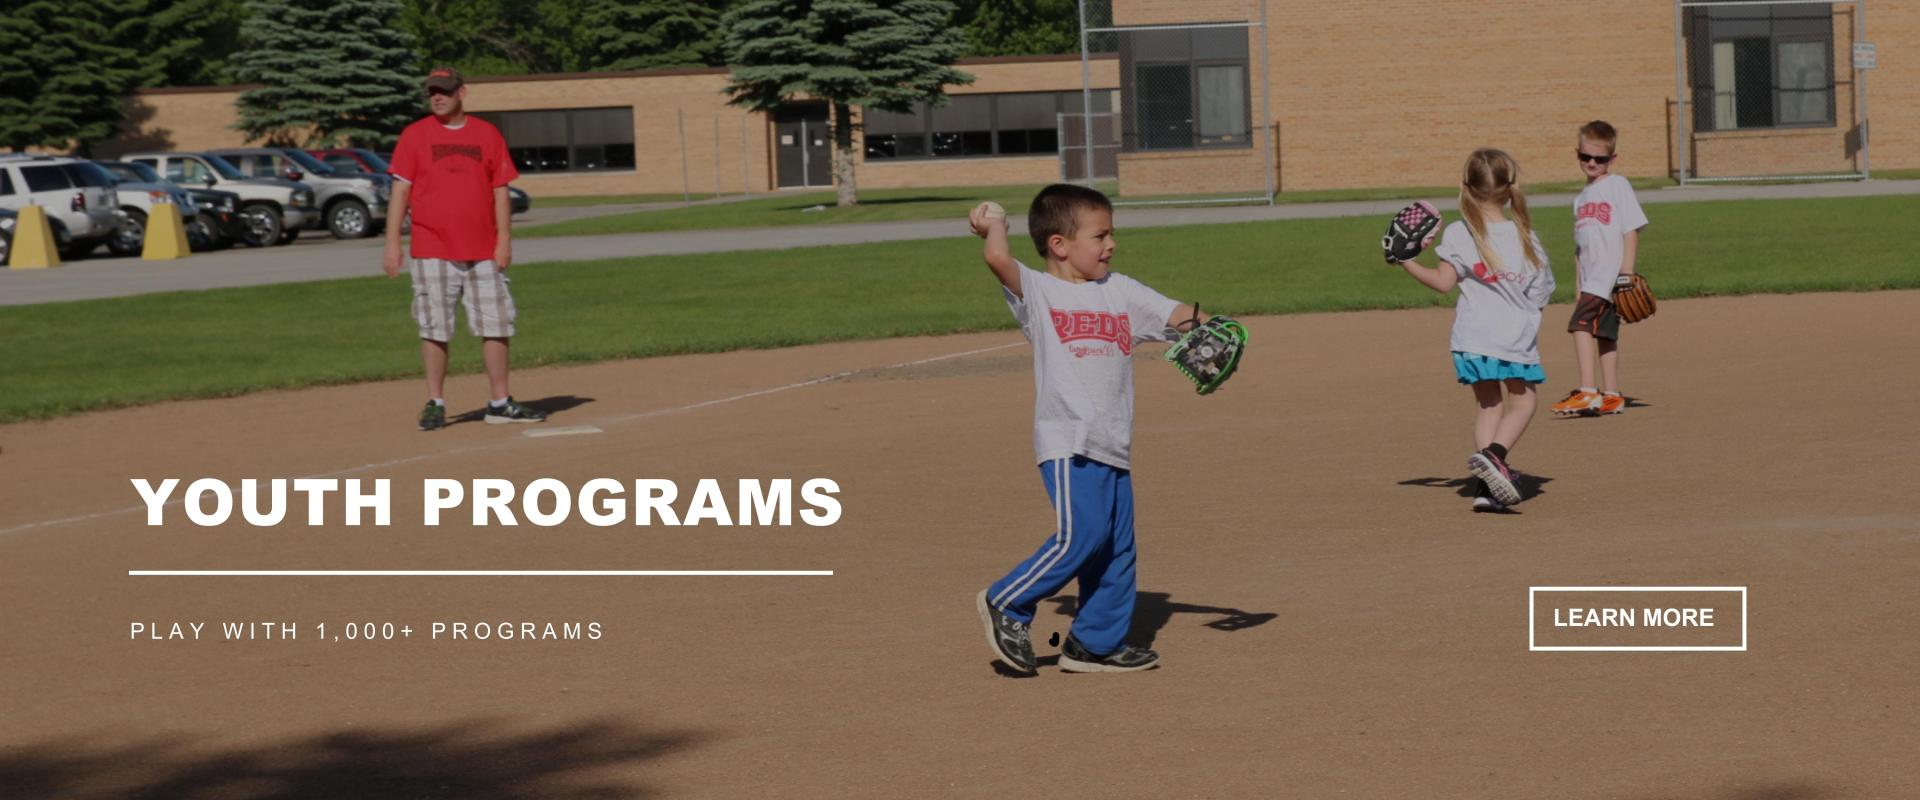 YOUTH PROGRAMS - Play with 1,000+ programs kids playing baseball on field with a coach